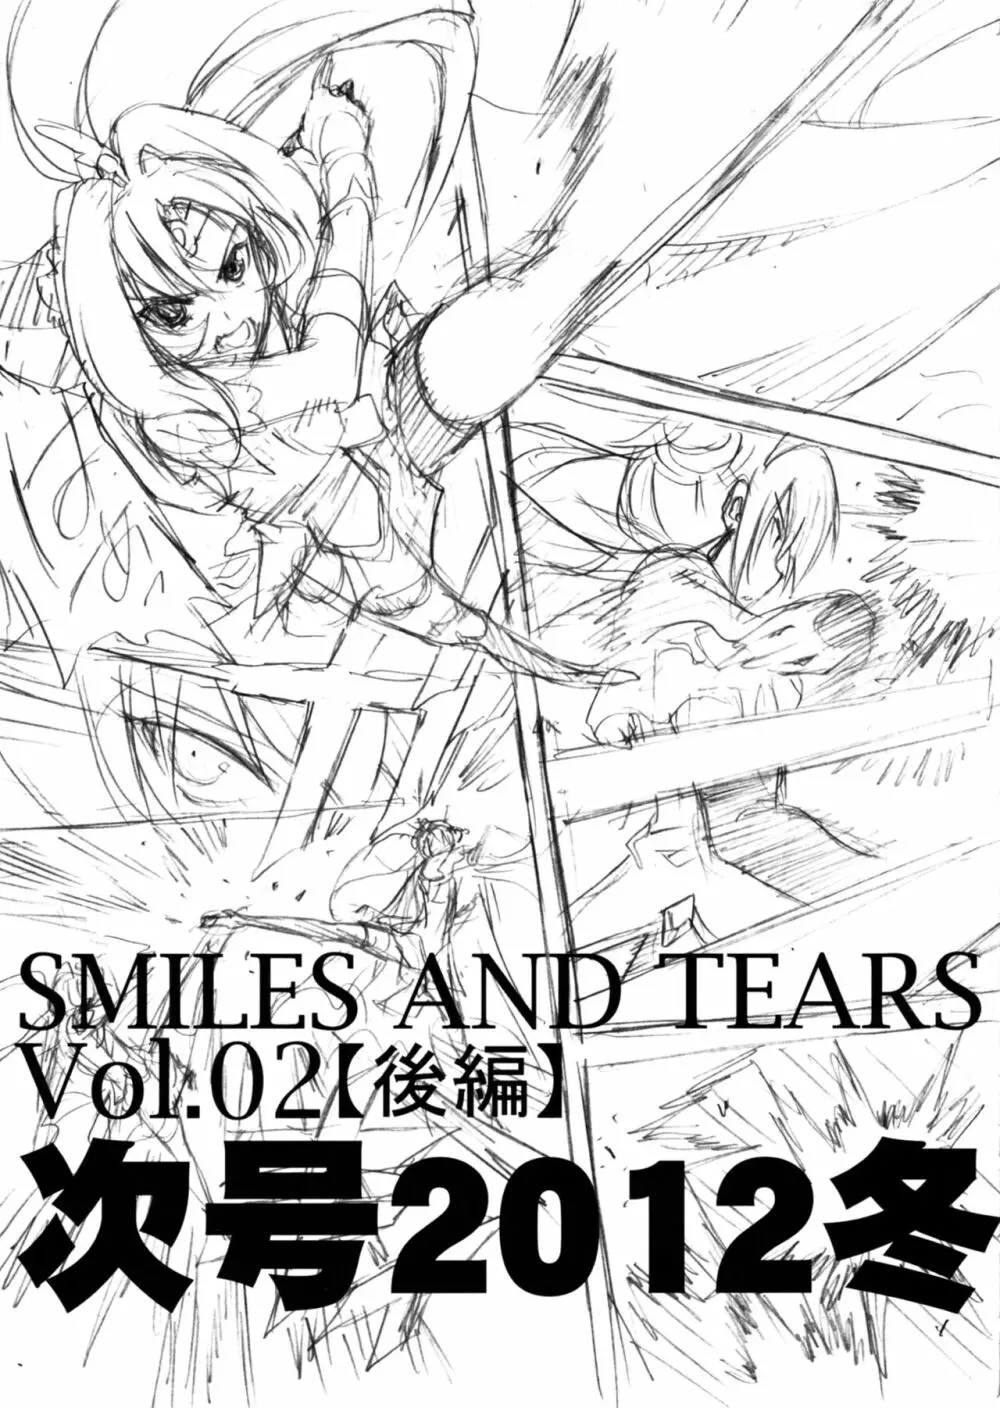 SMILES AND TEARS Vol.01 32ページ